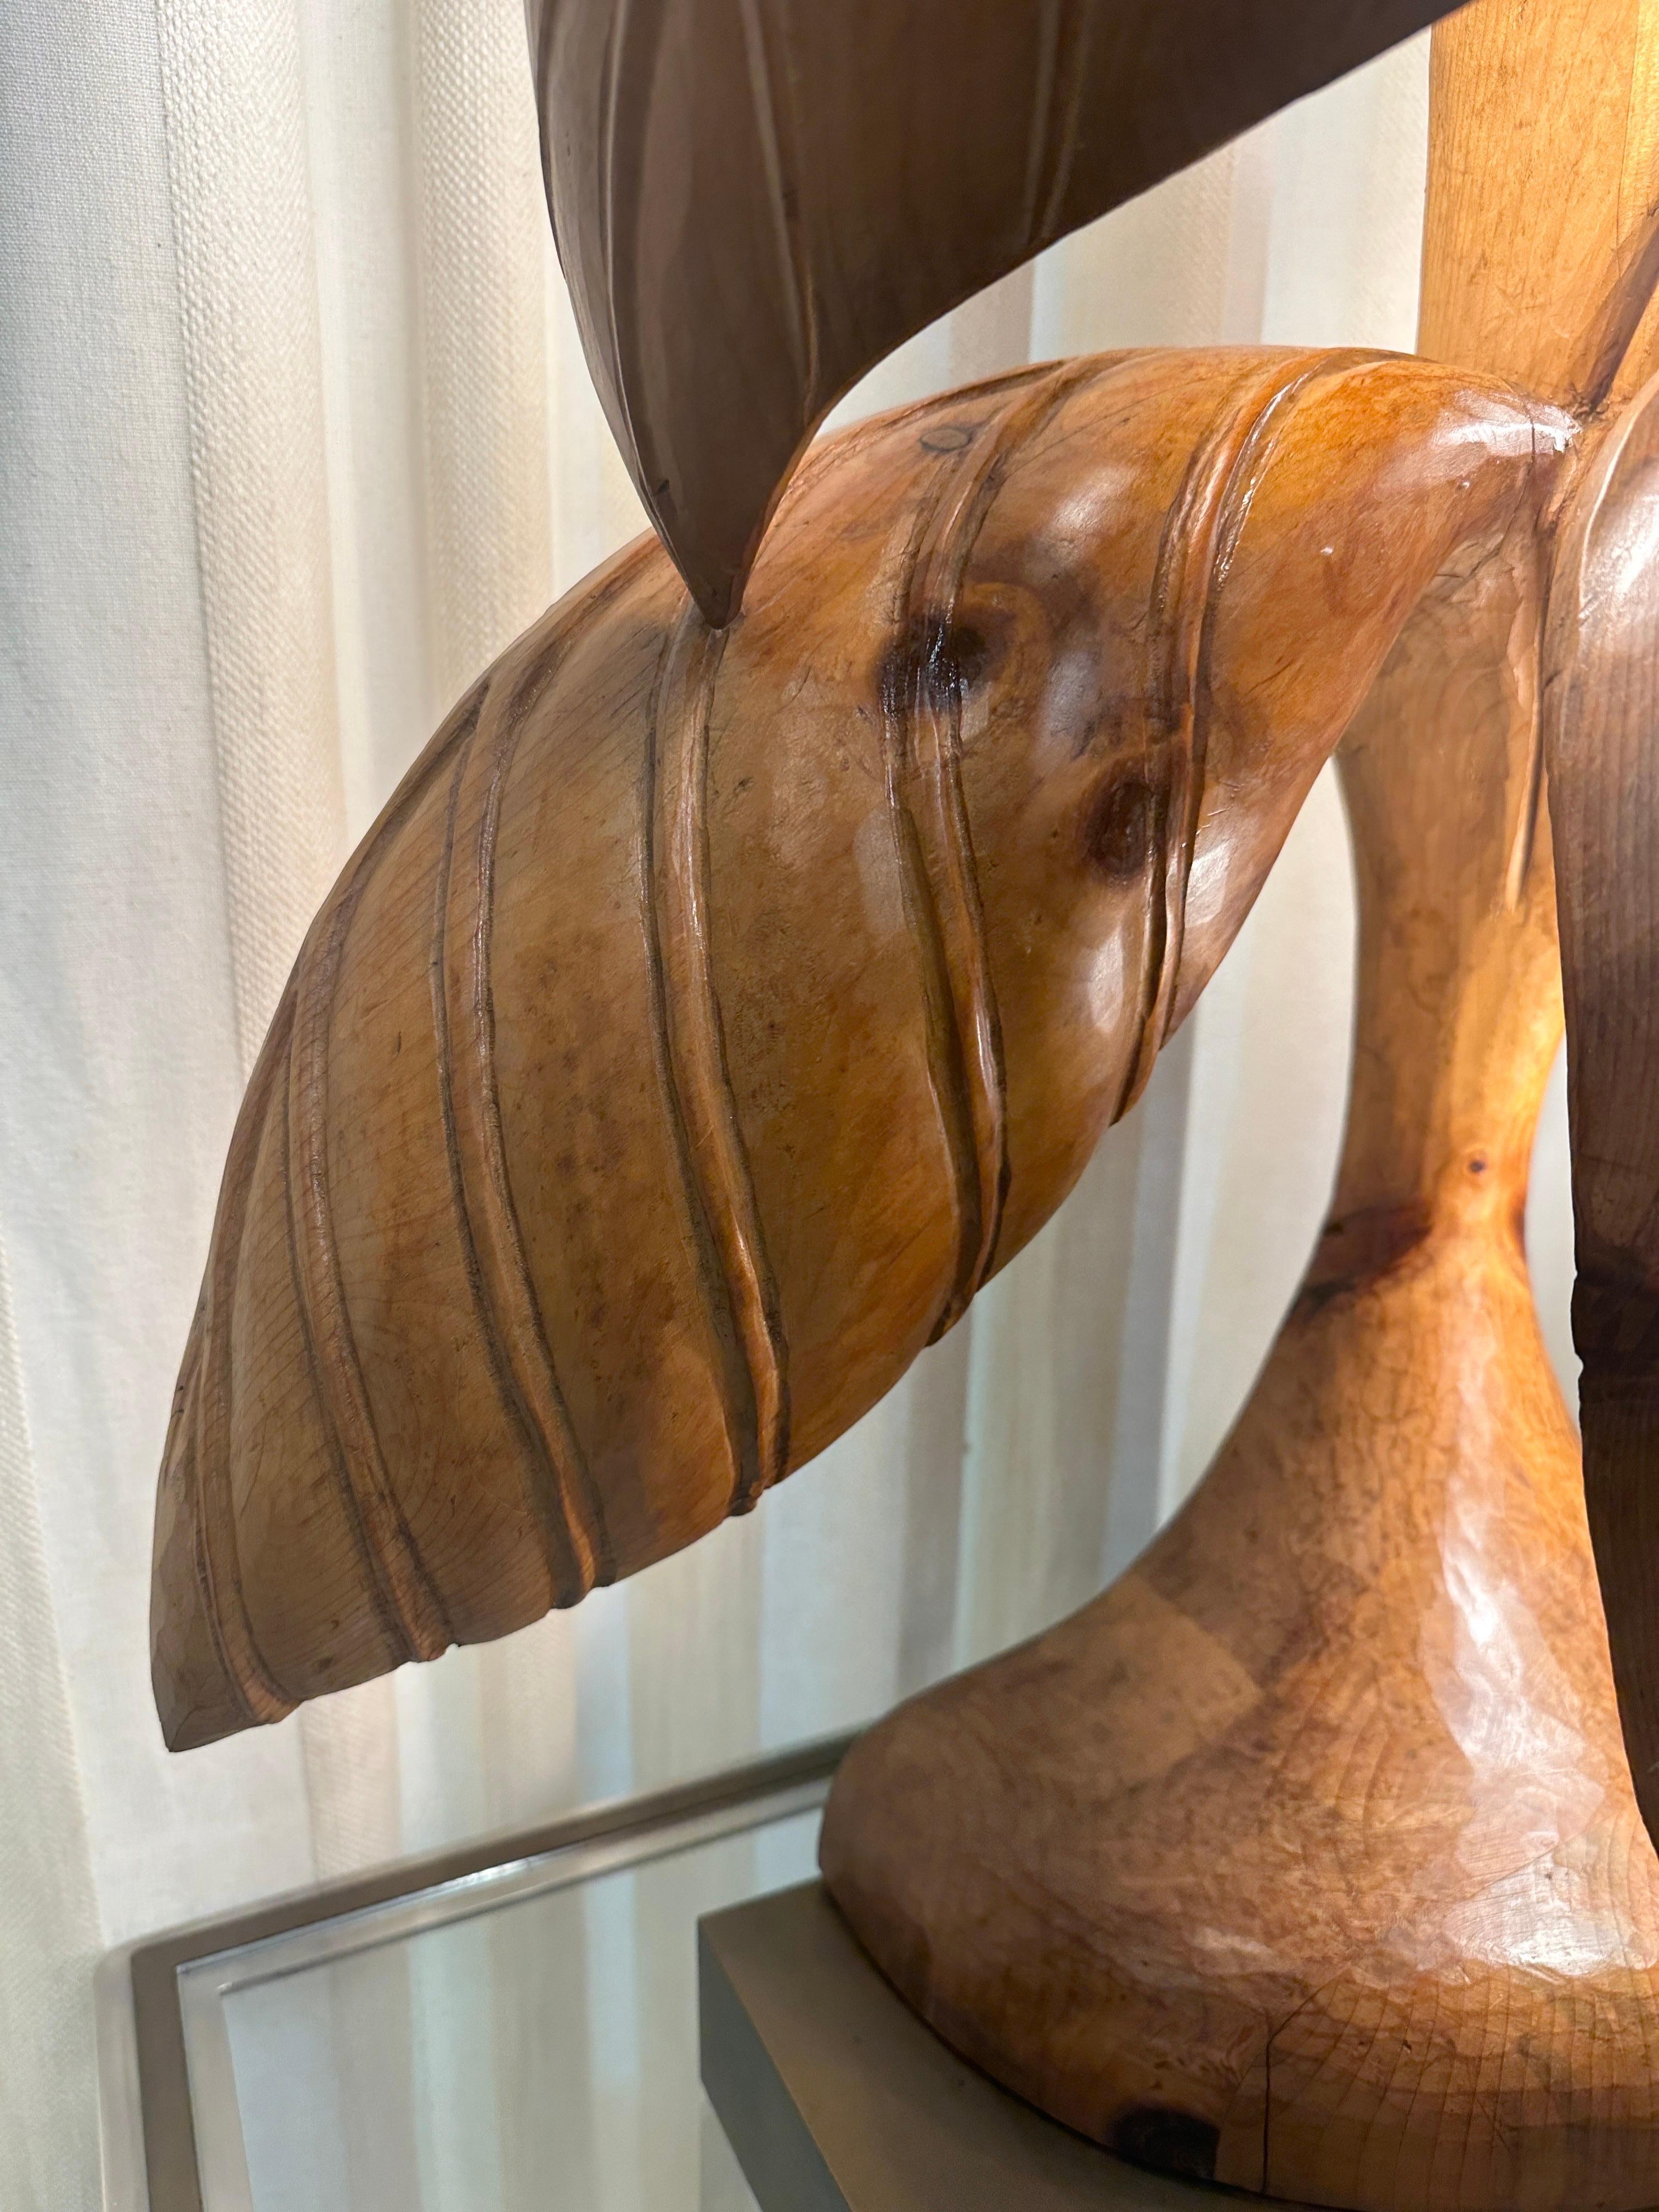 Extraordinary Rhubarb Leaf Sculpture Lamp by Bartolozzi & Maioli In Good Condition For Sale In East Hampton, NY